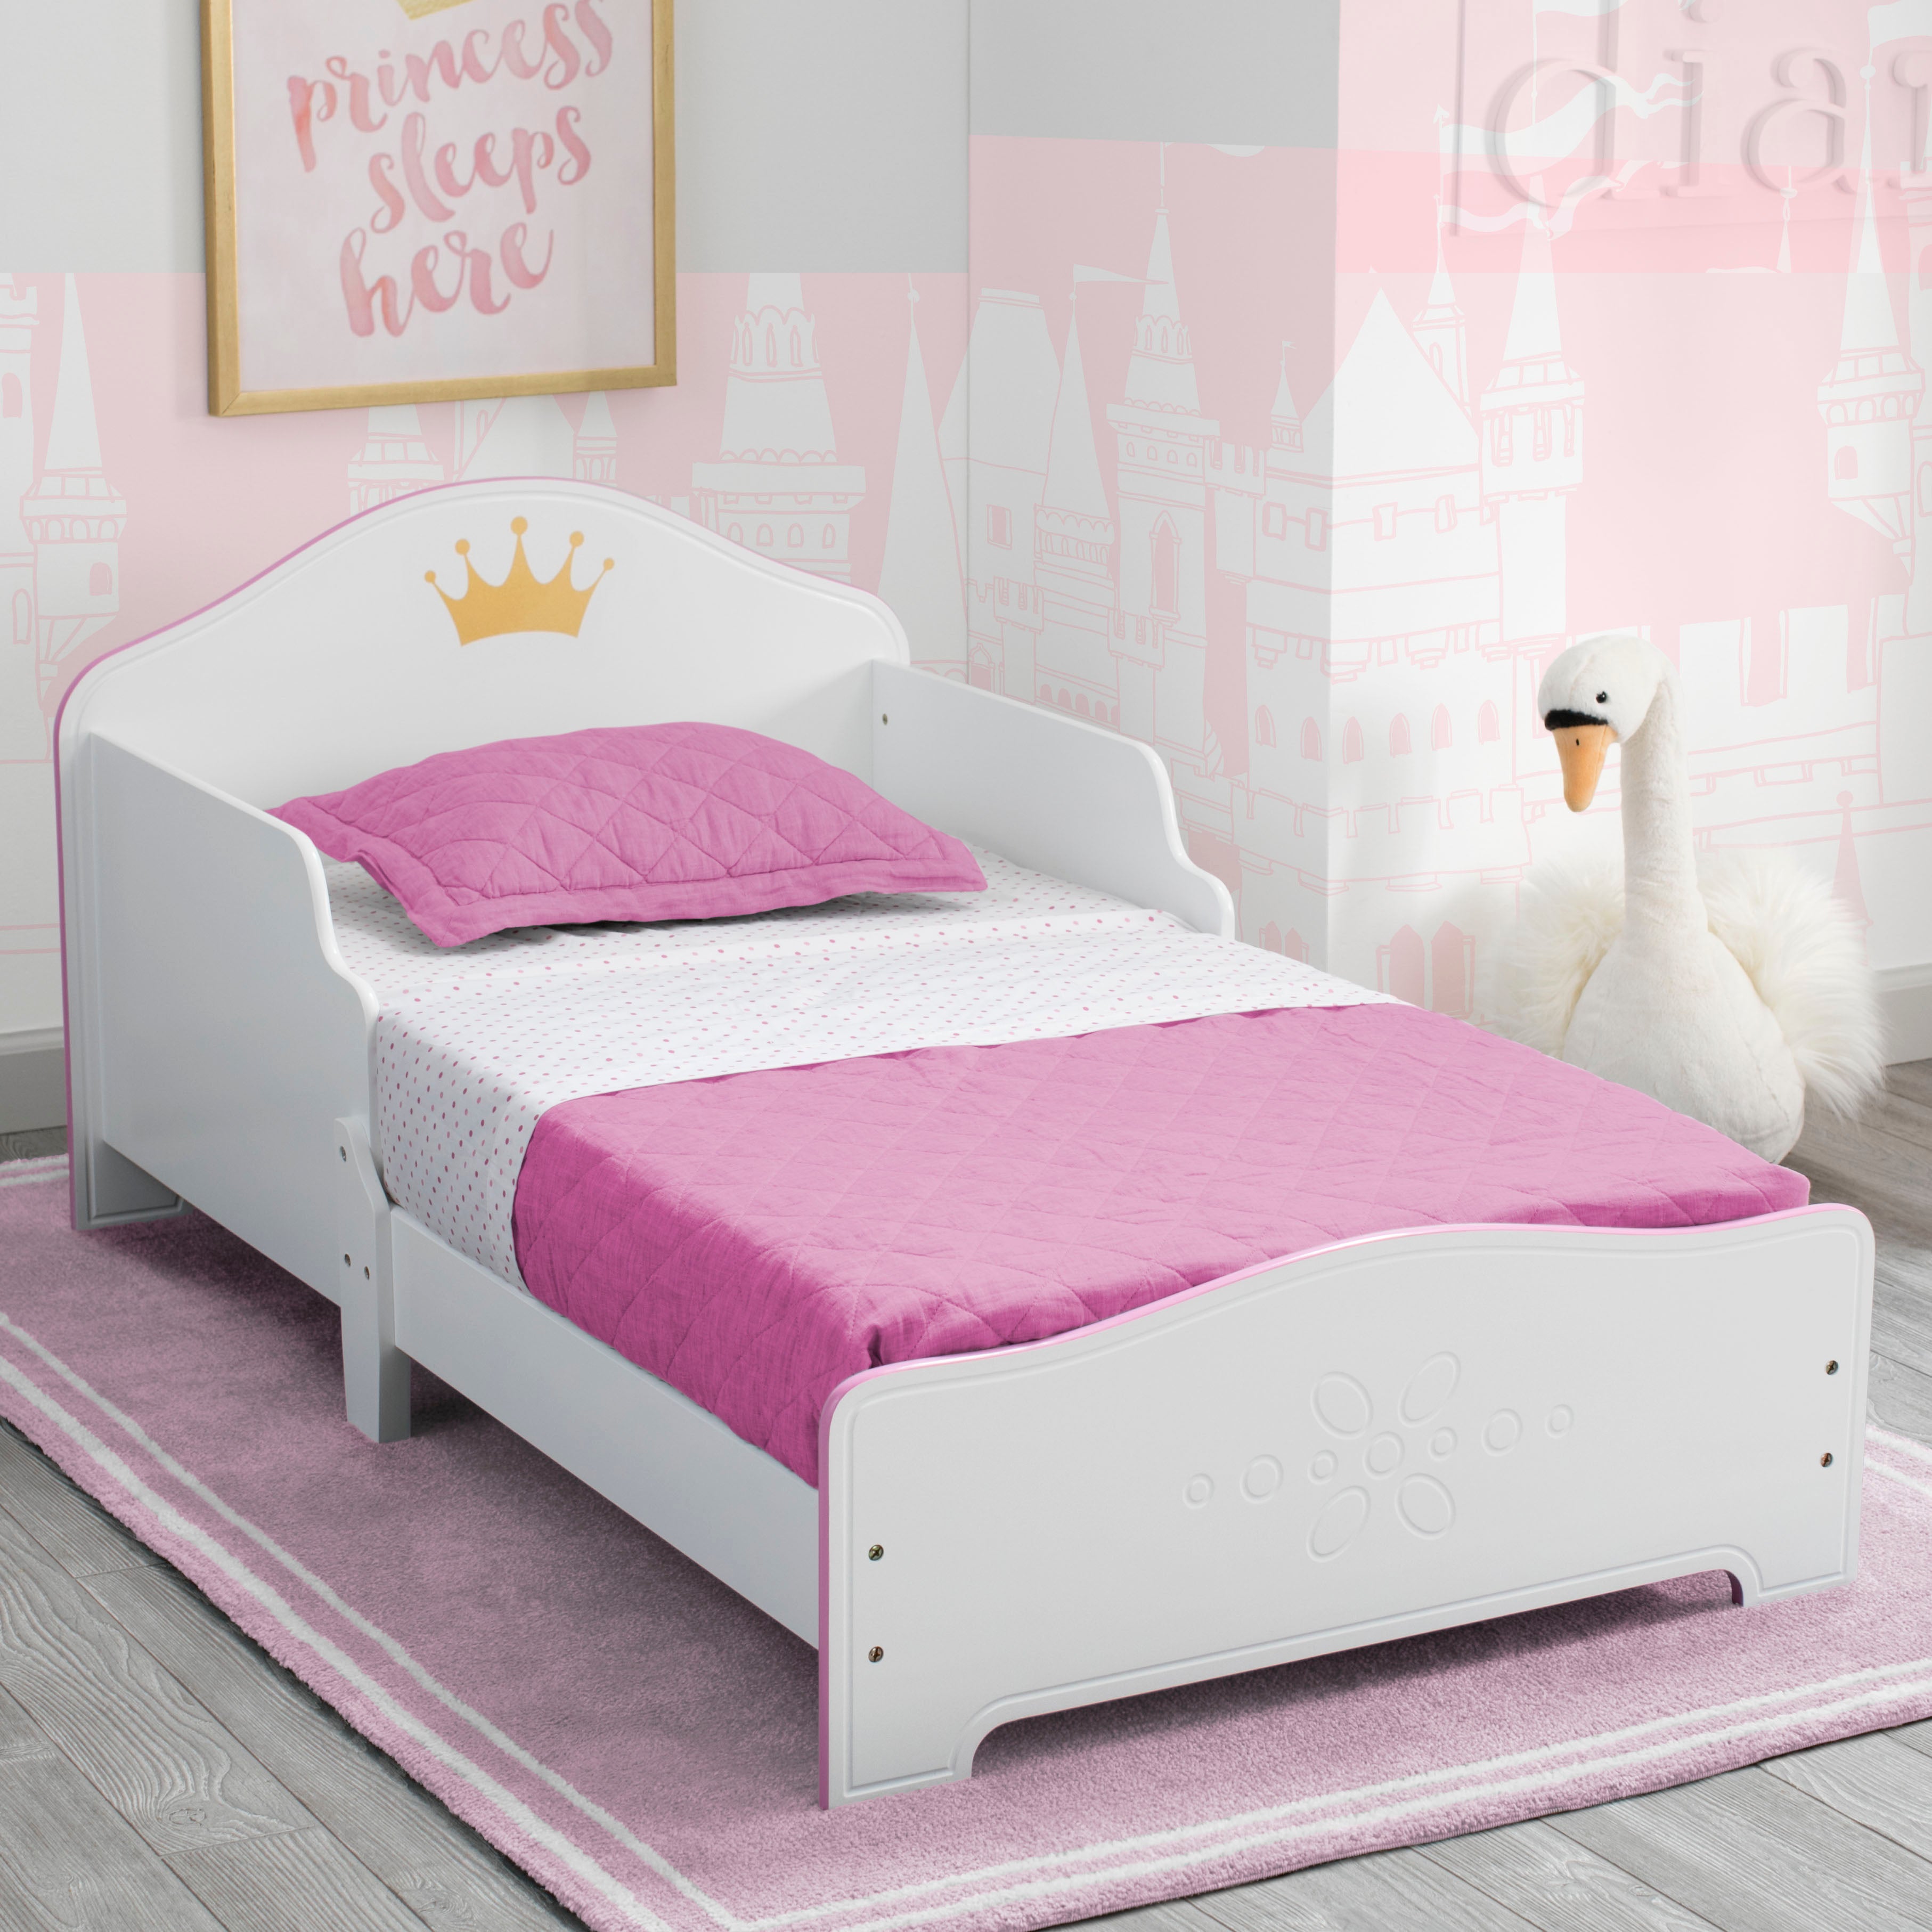 wooden princess bed Cheaper Than Retail Price> Buy Clothing